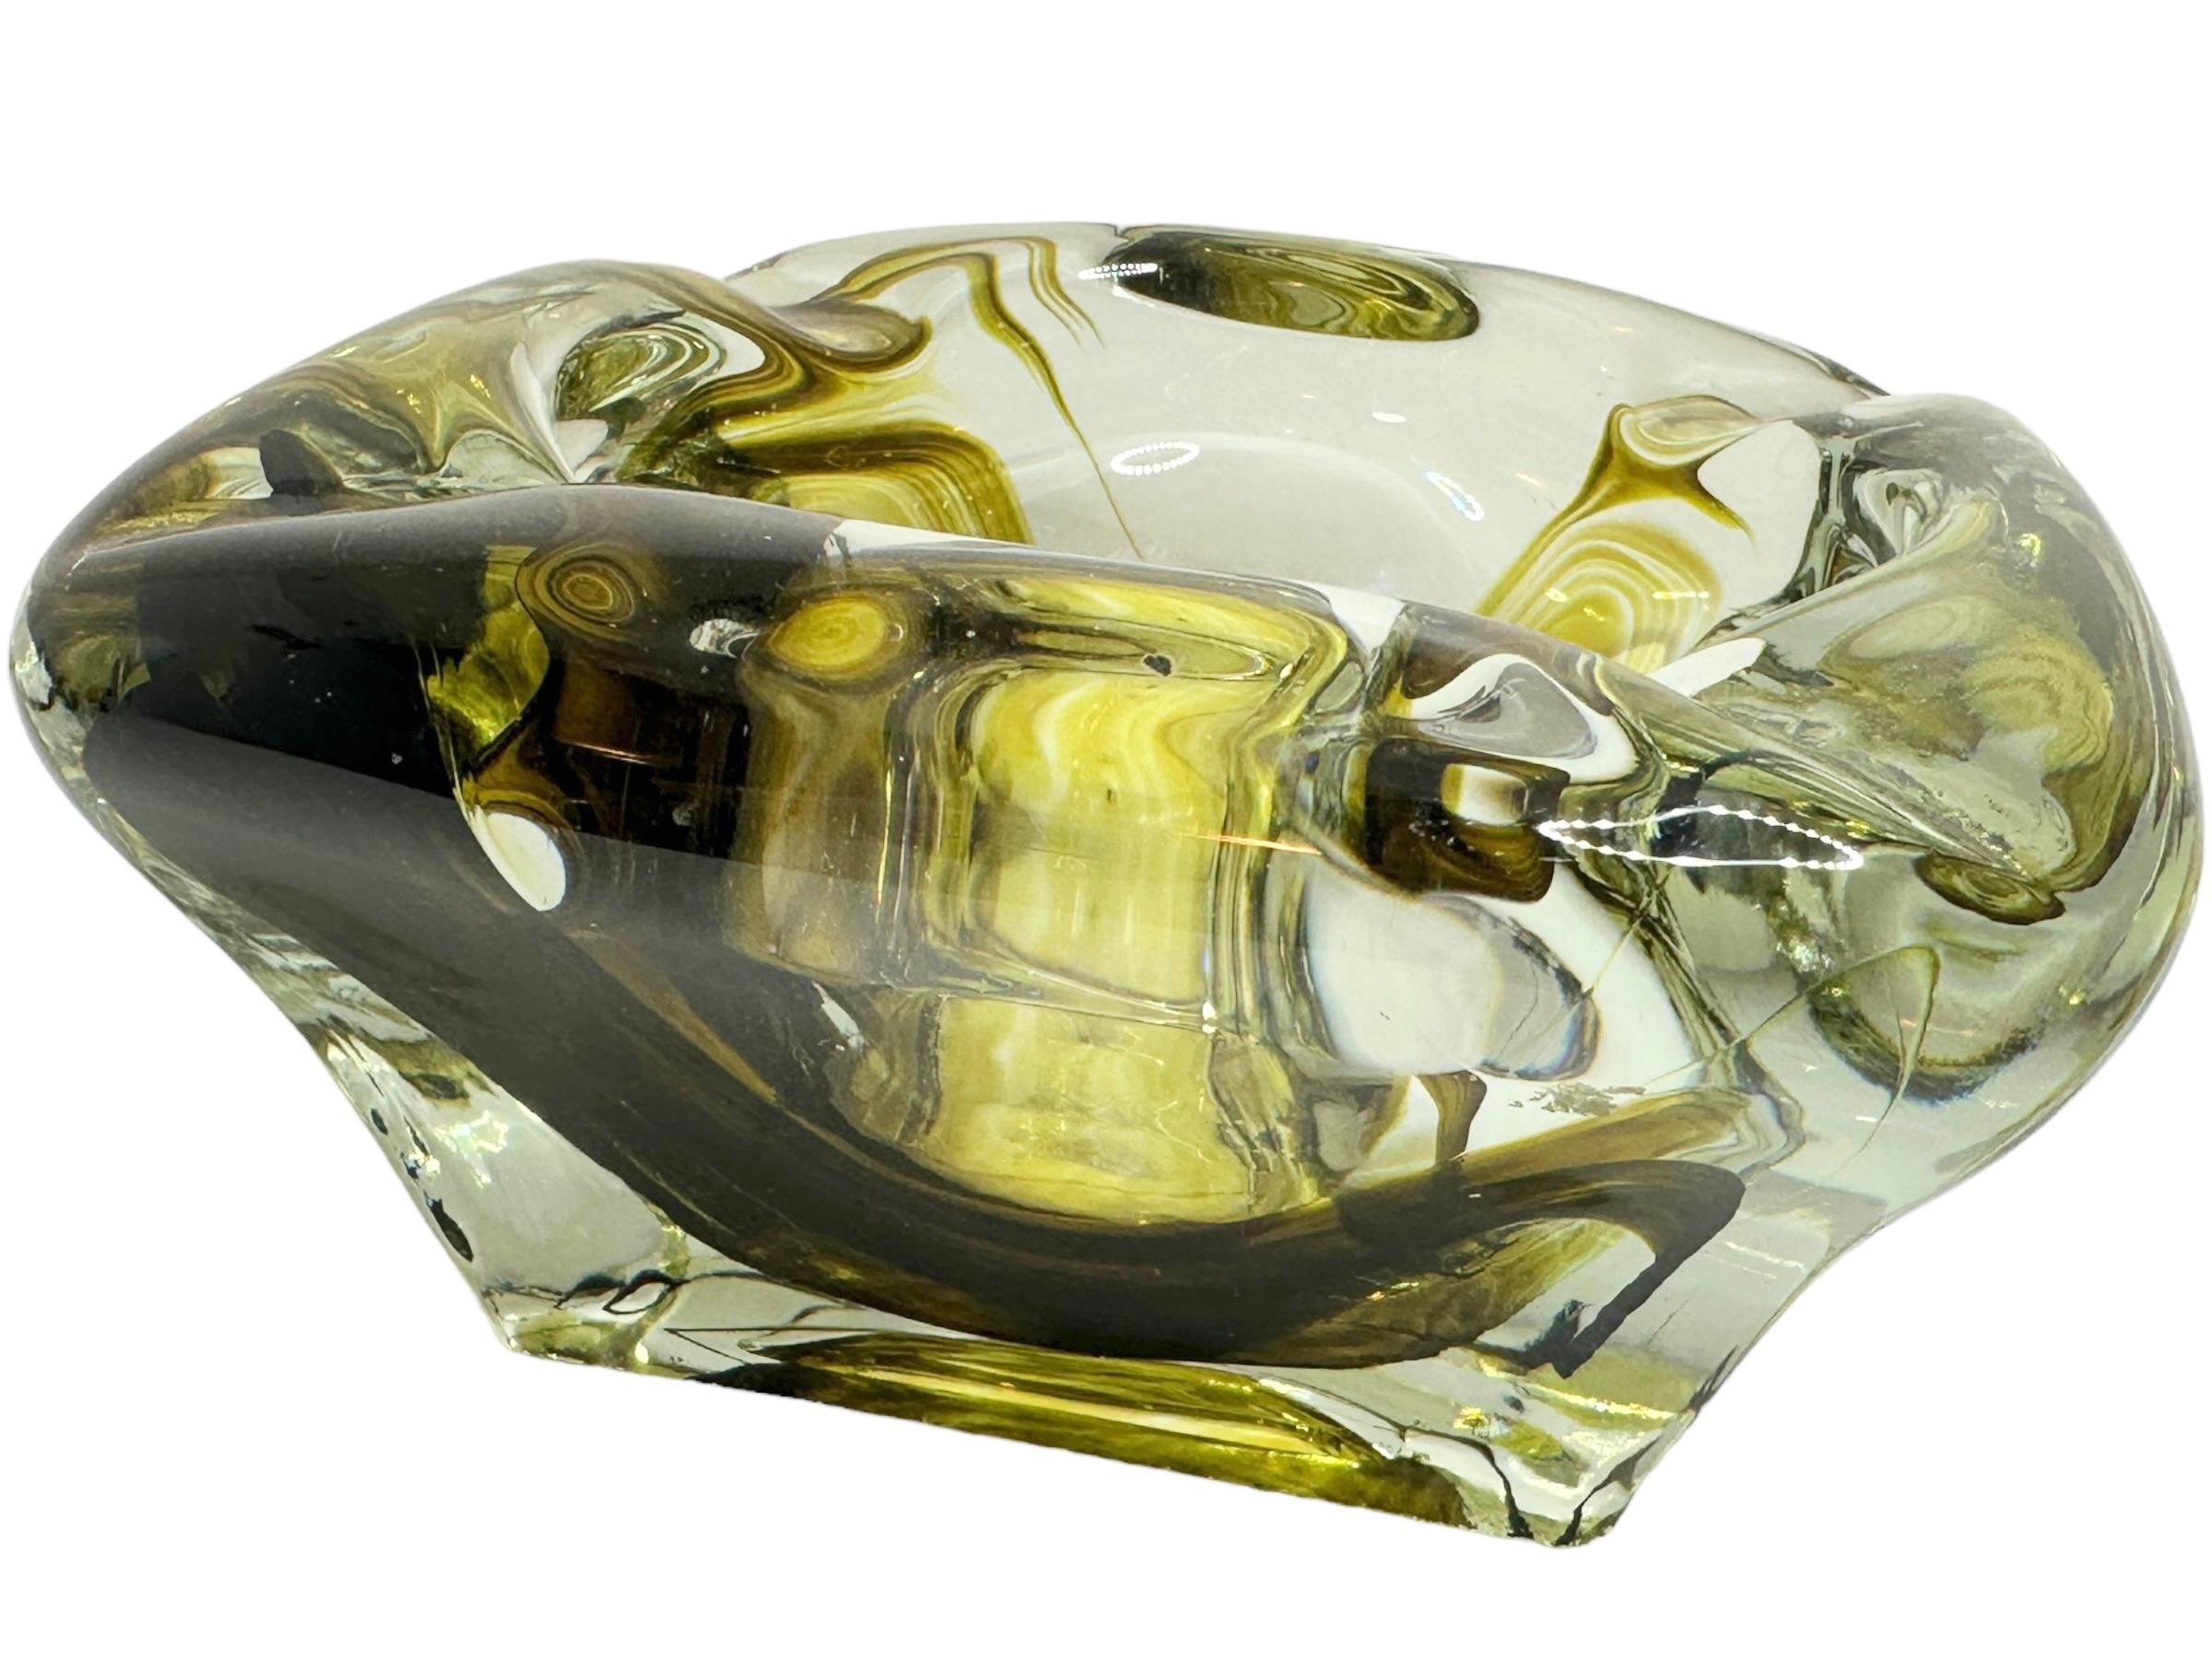 Hand-Crafted Monumental Brutalist Murano Sommerso Glass Cigar Ashtray, Vintage, Italy, 1970s